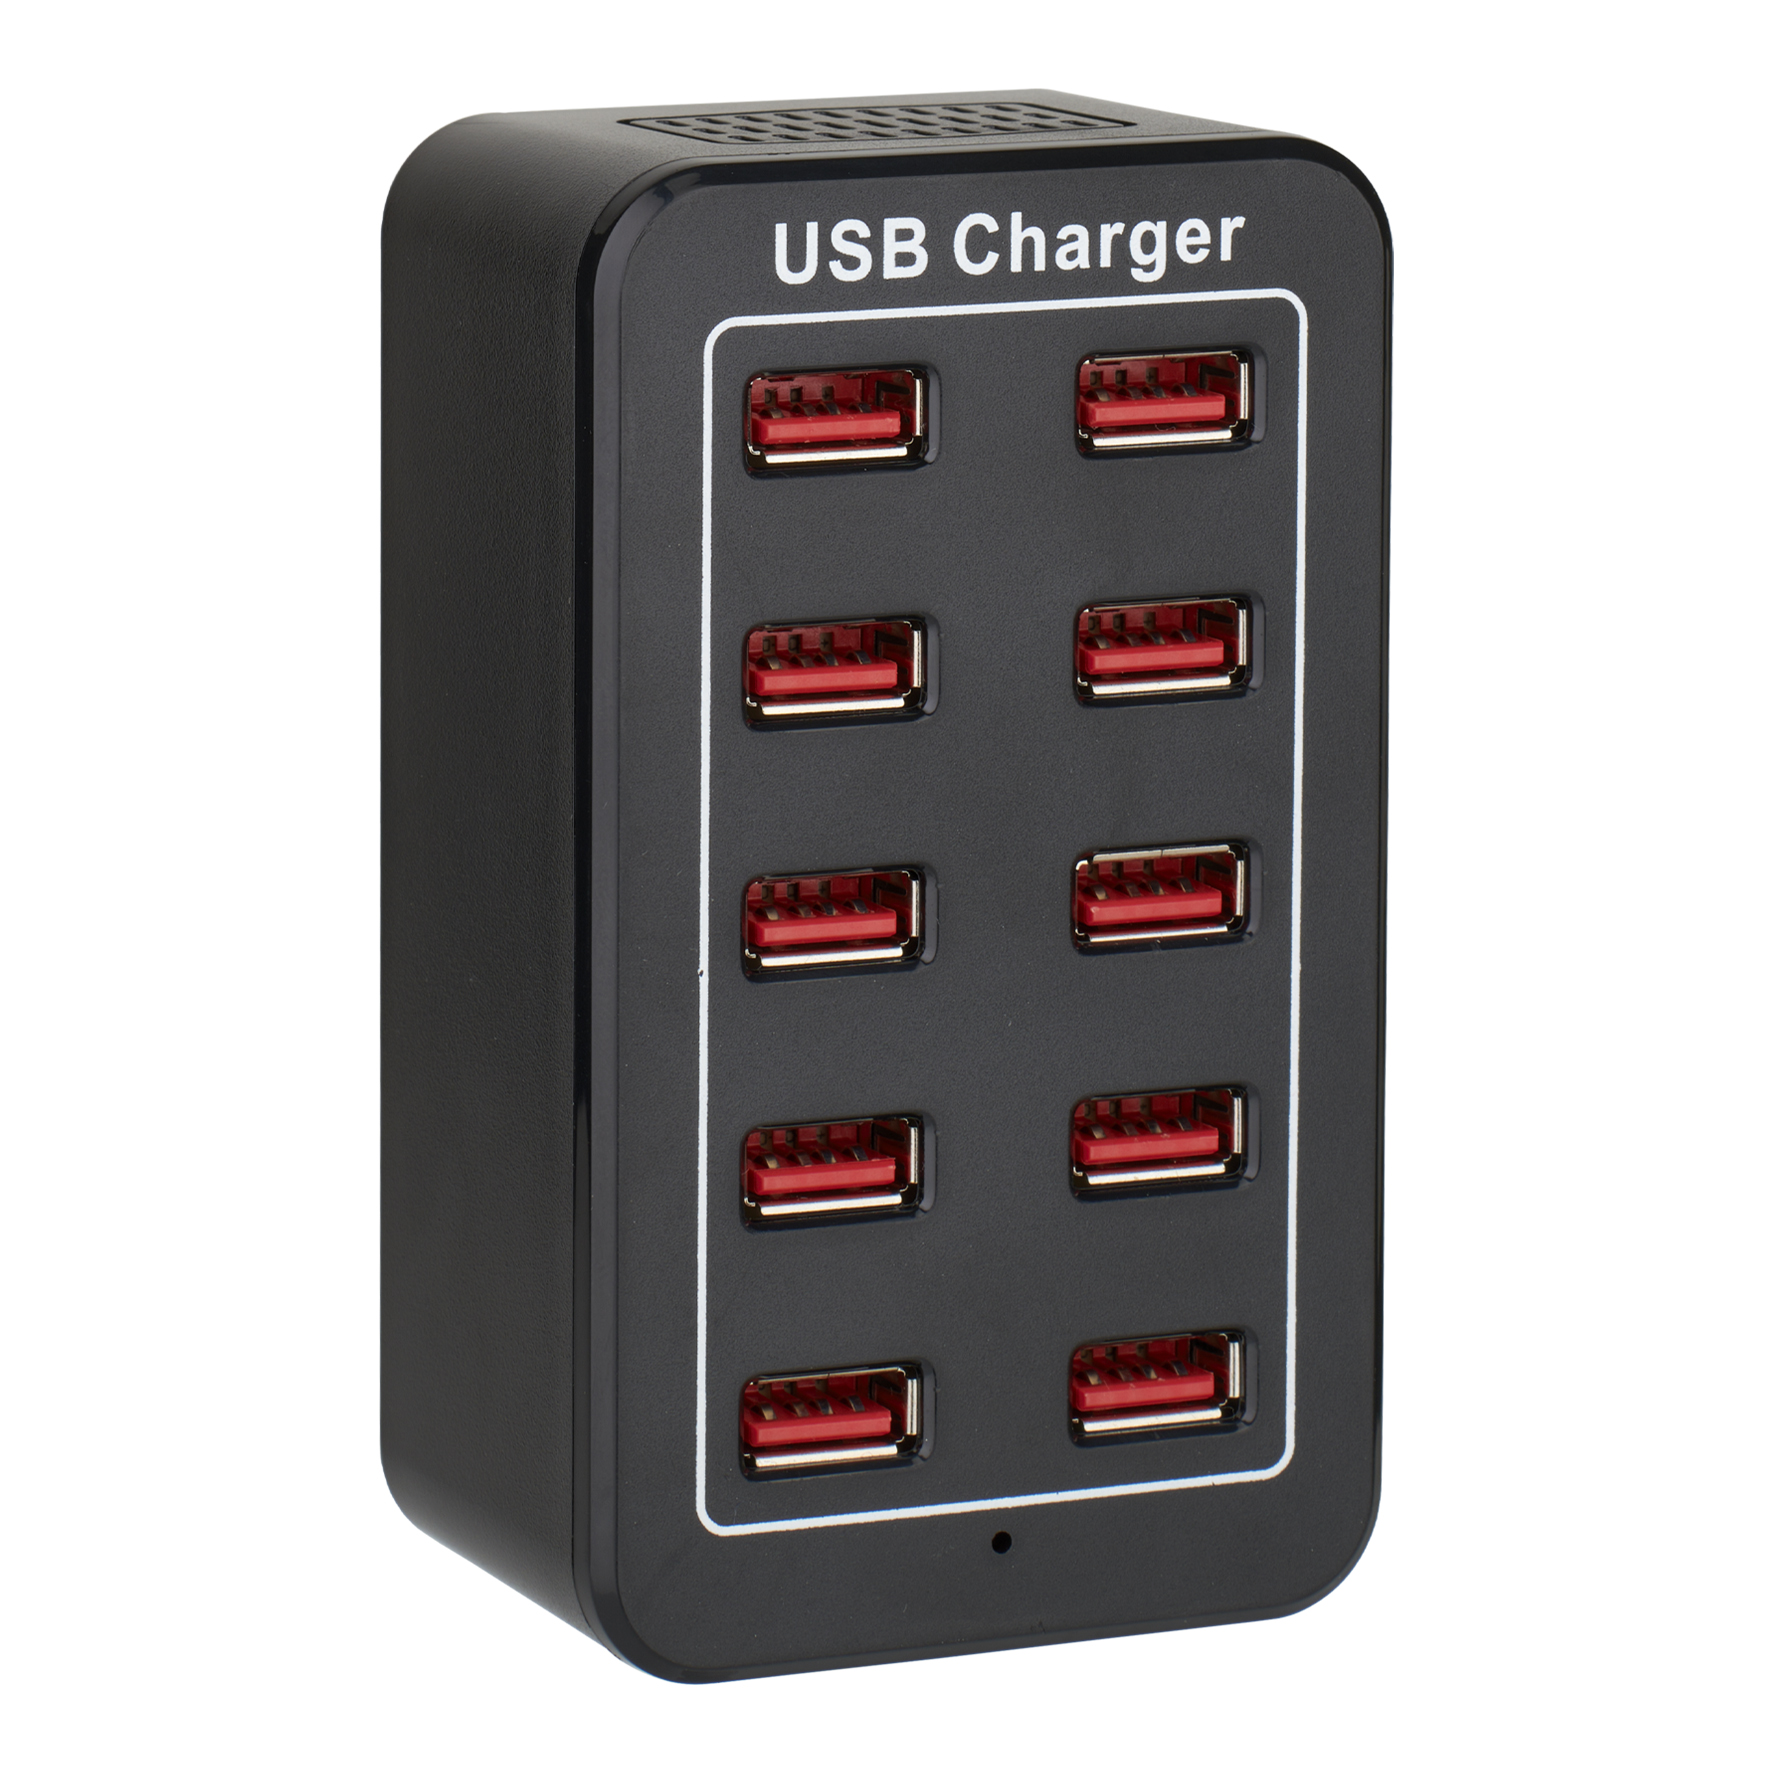 USB Charger 10 Ports